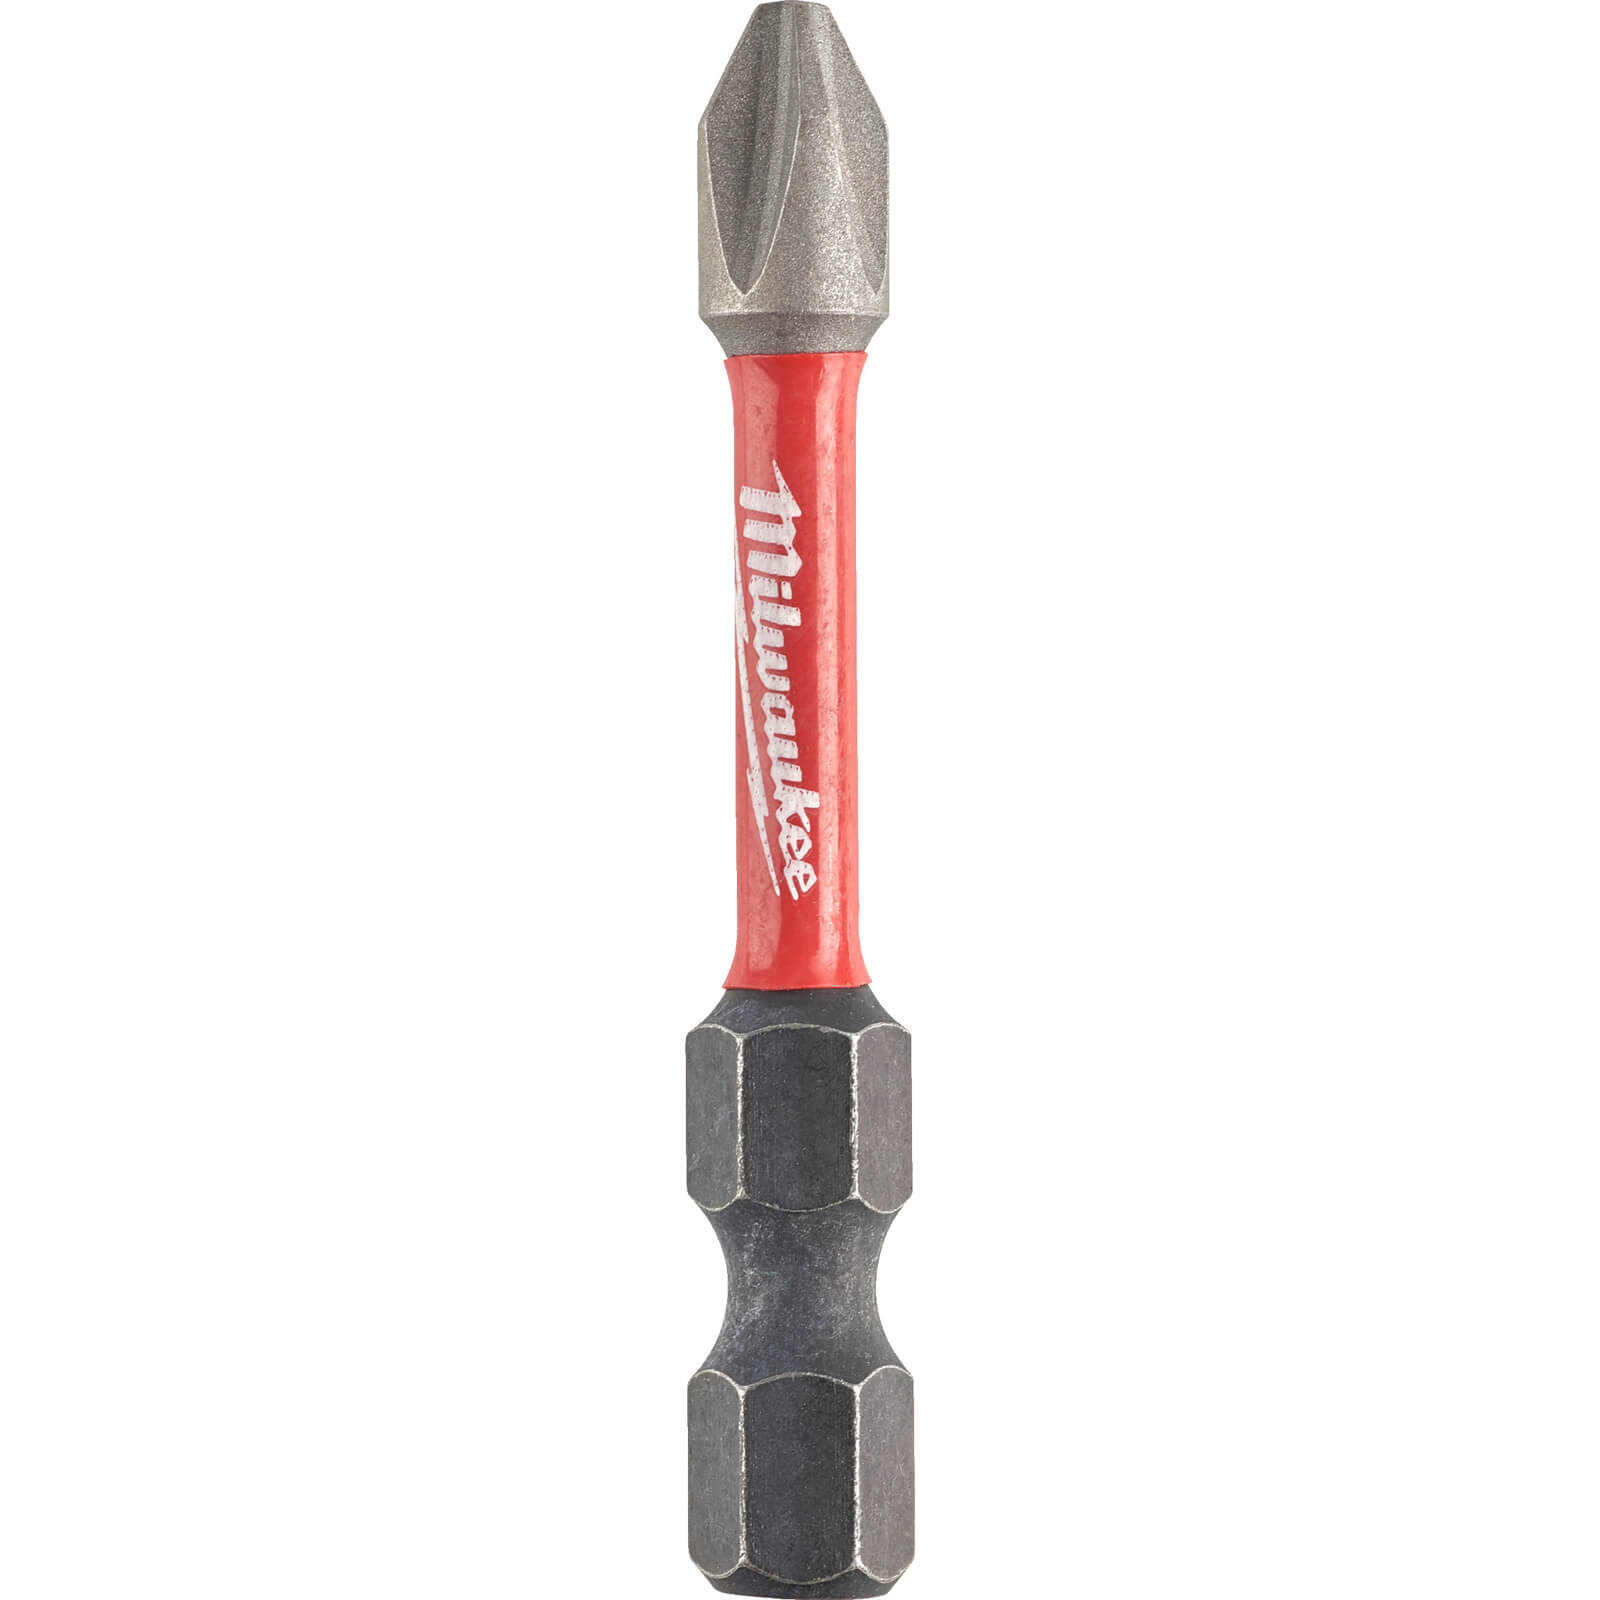 Photos - Bits / Sockets Milwaukee Shockwave Impact Duty Phillips Screwdriver Bits PH2 50mm Pack of 